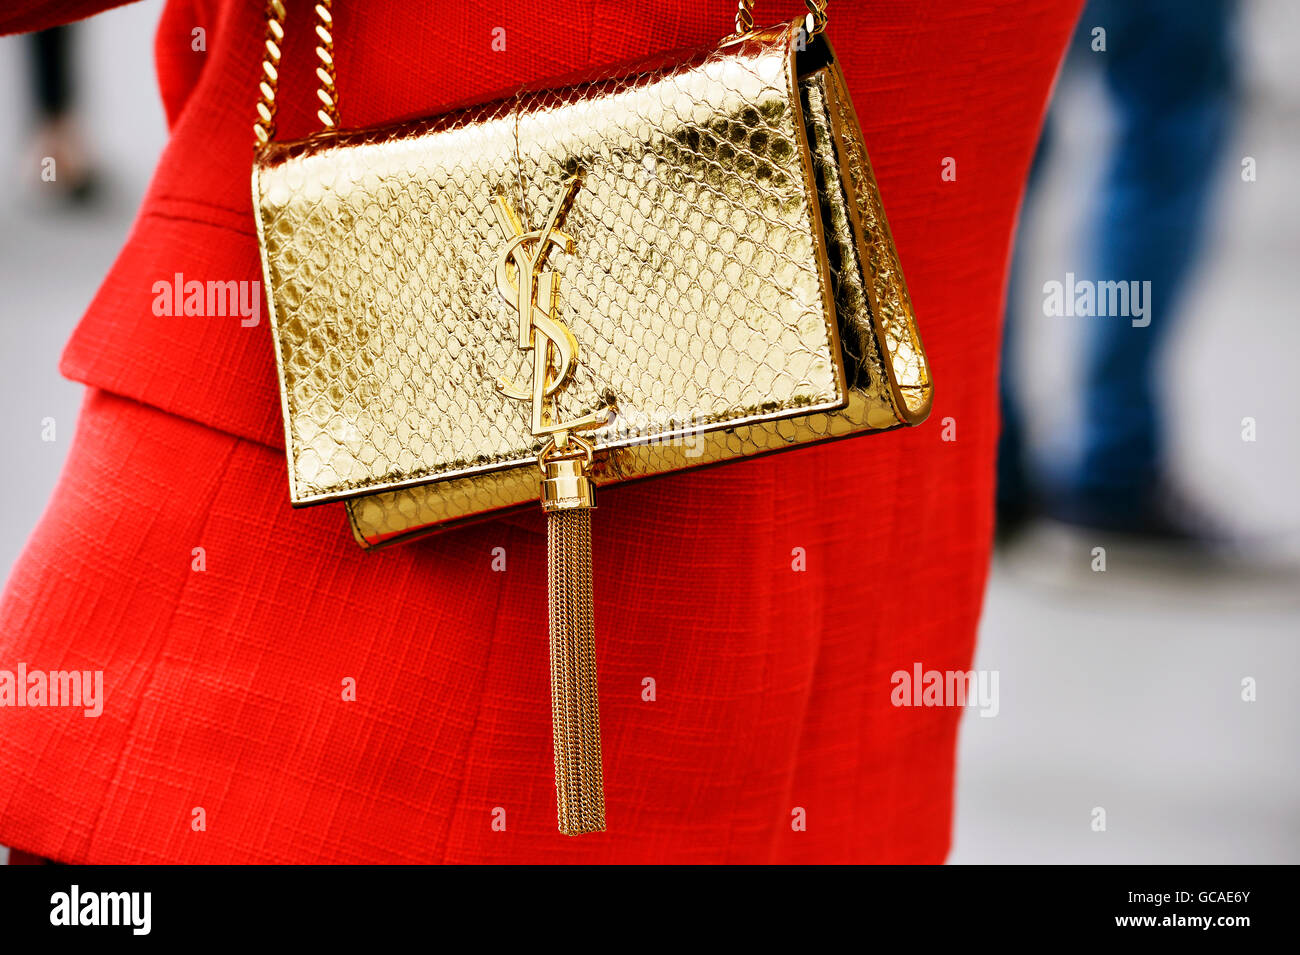 Lily Allen has her hands full carrying large Yves Saint Laurent shopping  bags while out on a shopping spree at Sloane Street Stock Photo - Alamy